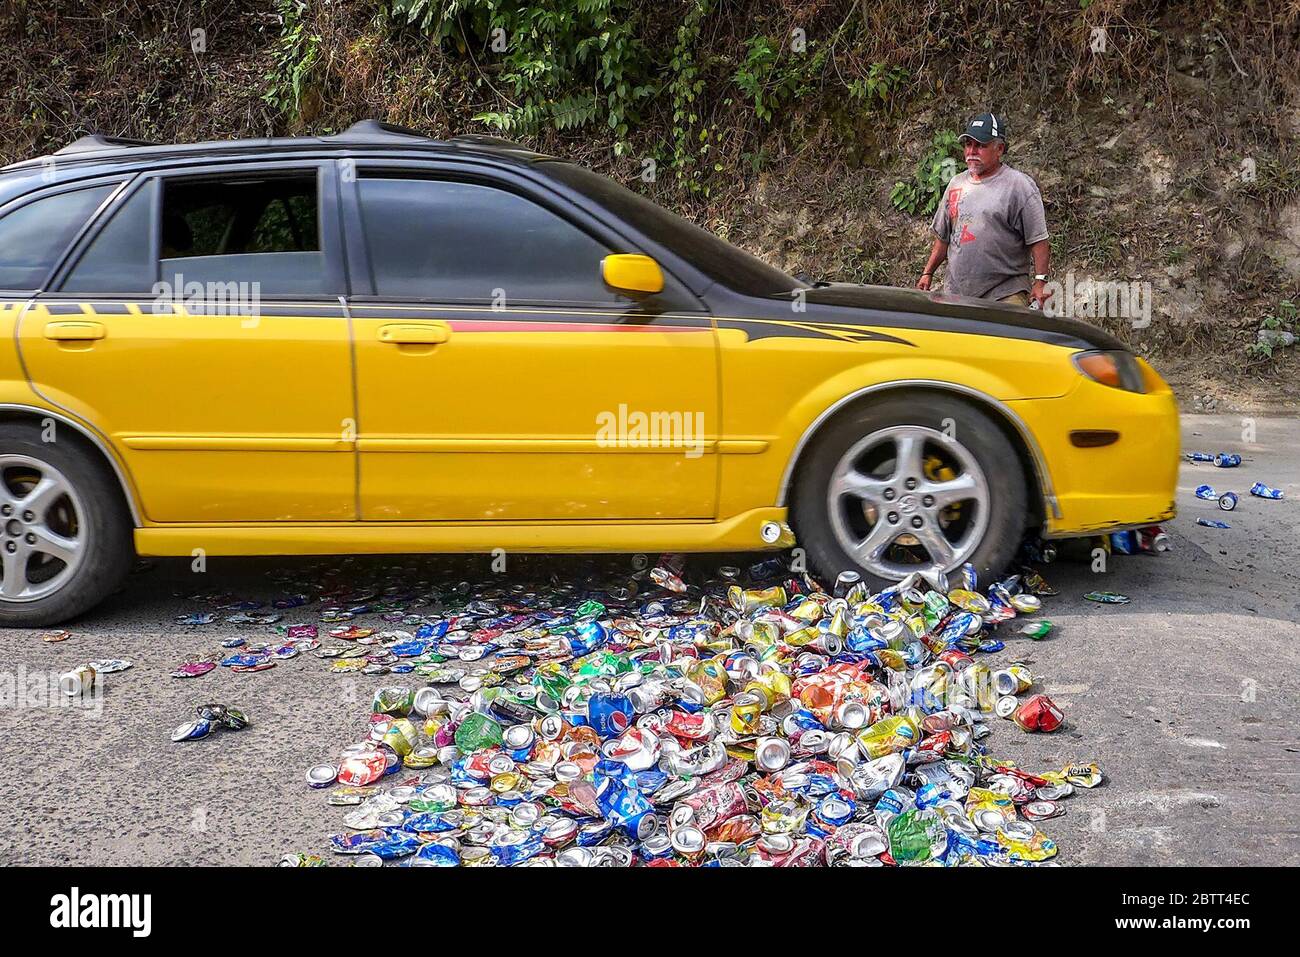 In San Andrés Semetabaj, a municipality in Sololá, Guatemala, Alirio López, 63, places soda cans on a road so that passing cars will crush them. Alirio recycles the cans into kitchen utensils. (Brenda Leticia Saloj Chiyal, GPJ Guatemala) Stock Photo